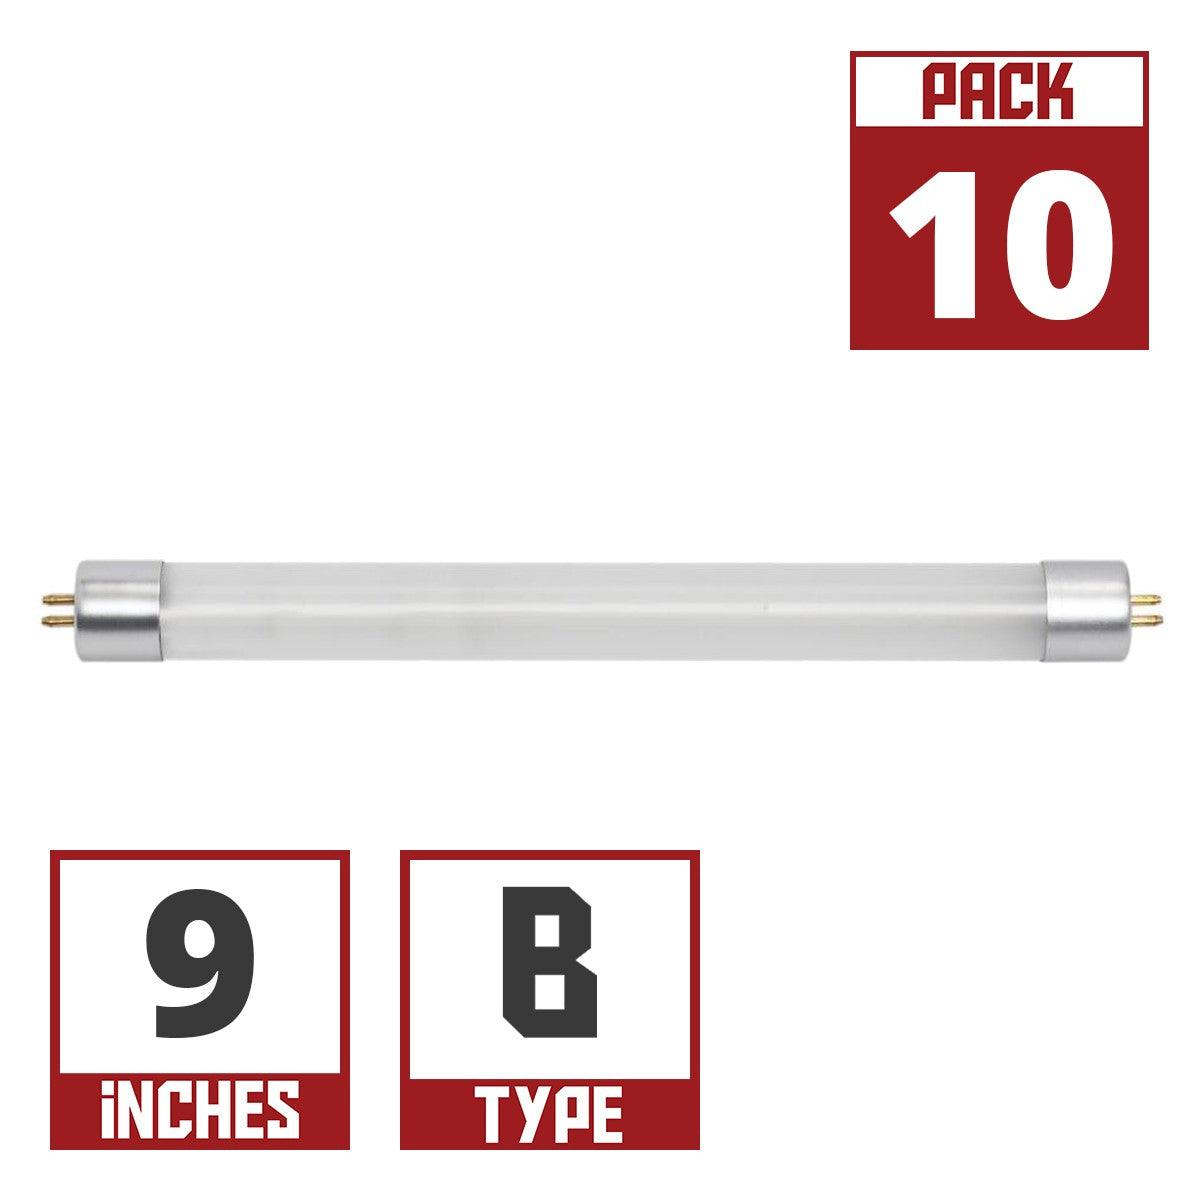 9 Inch LED mini T5 Tube, 3 Watt, 270 Lumens, 6500K, F6T5 Replacement, Ballast Bypass Double End, G5 Base (Case Of 10) - Bees Lighting